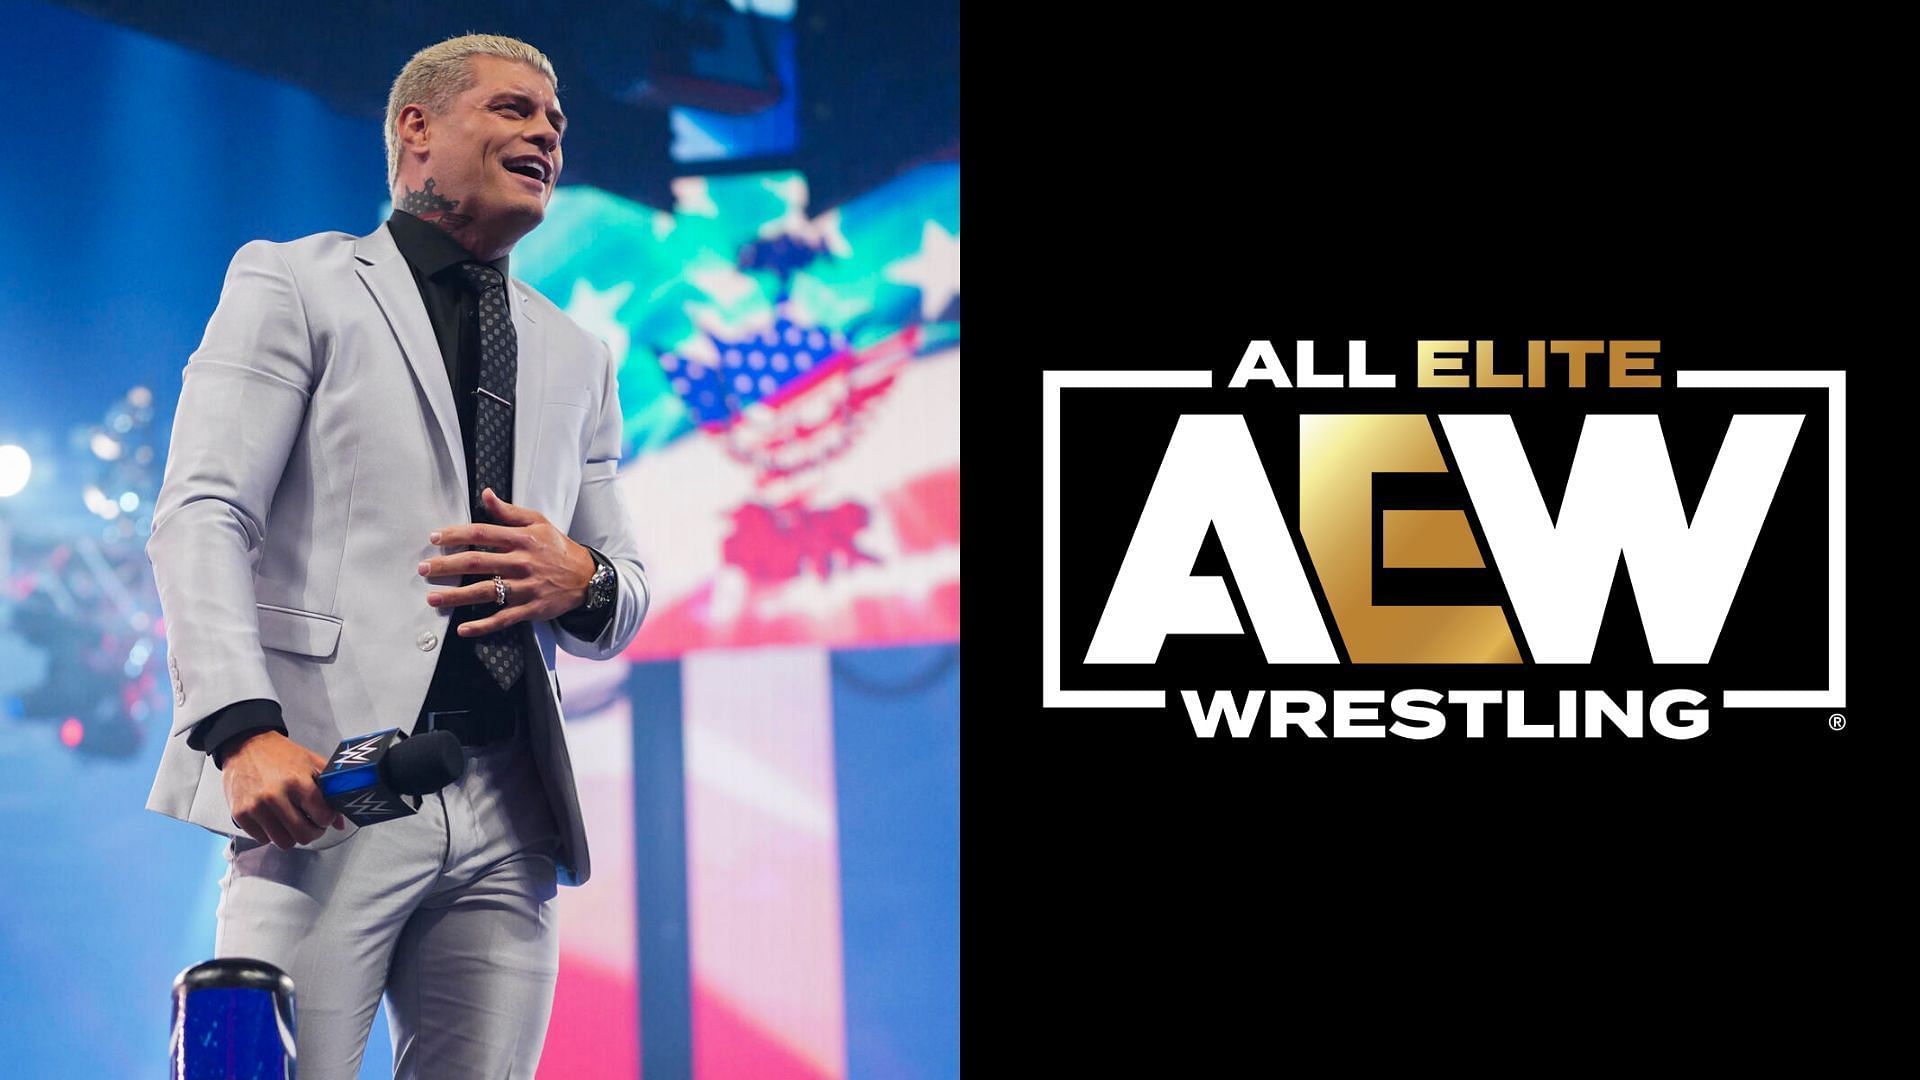 Cody Rhodes is set to be in the main event of WrestleMania for the second straight year [Photo courtesy of WWE